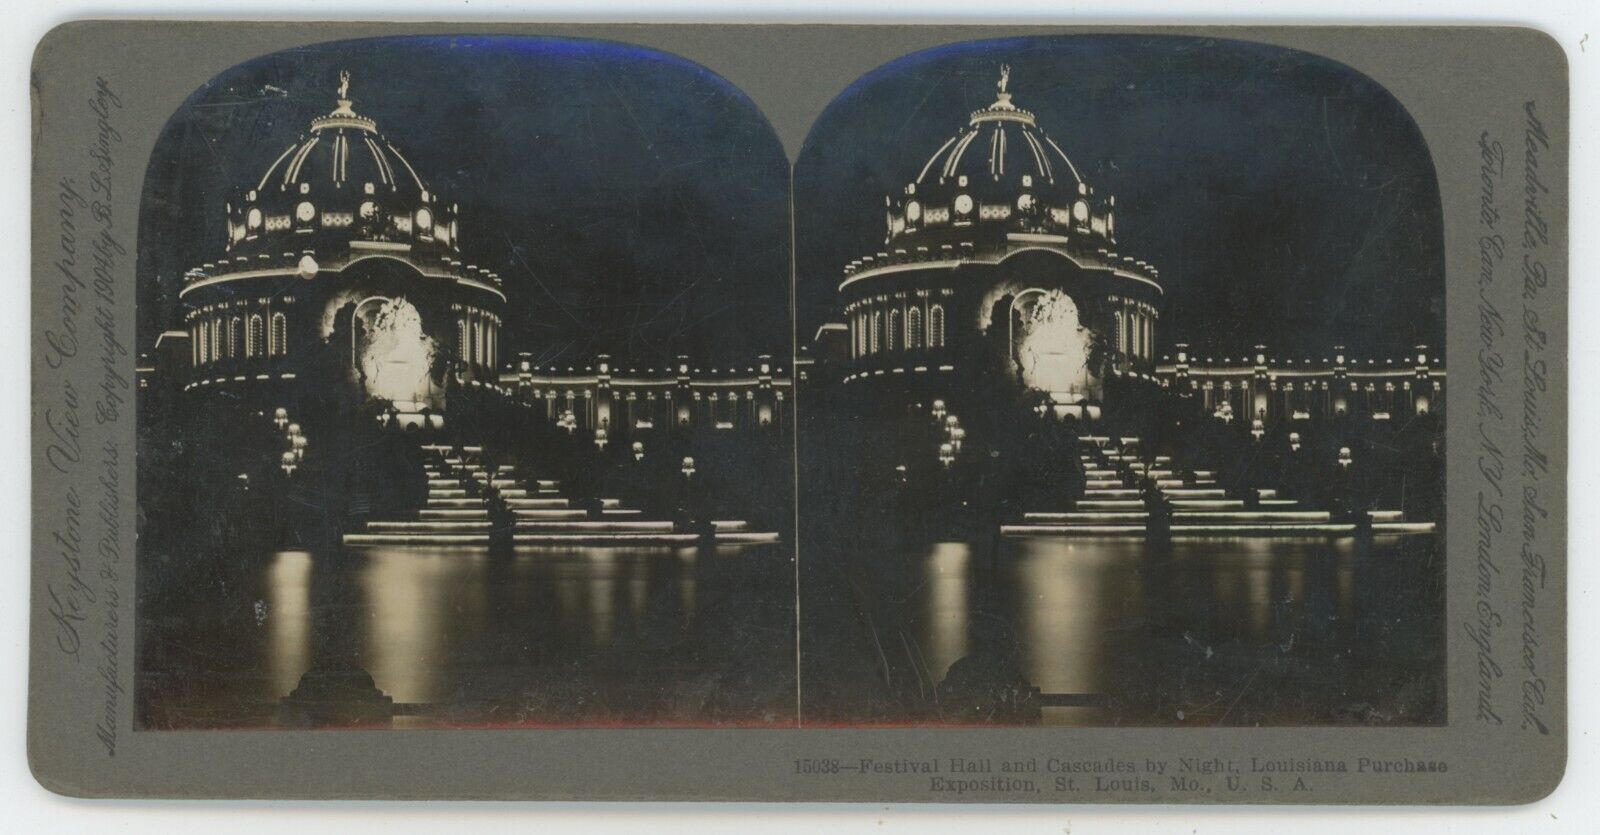 c1900's Real Photo Stereoview Festival Hall By Night LP Exposistion St. Louis MO